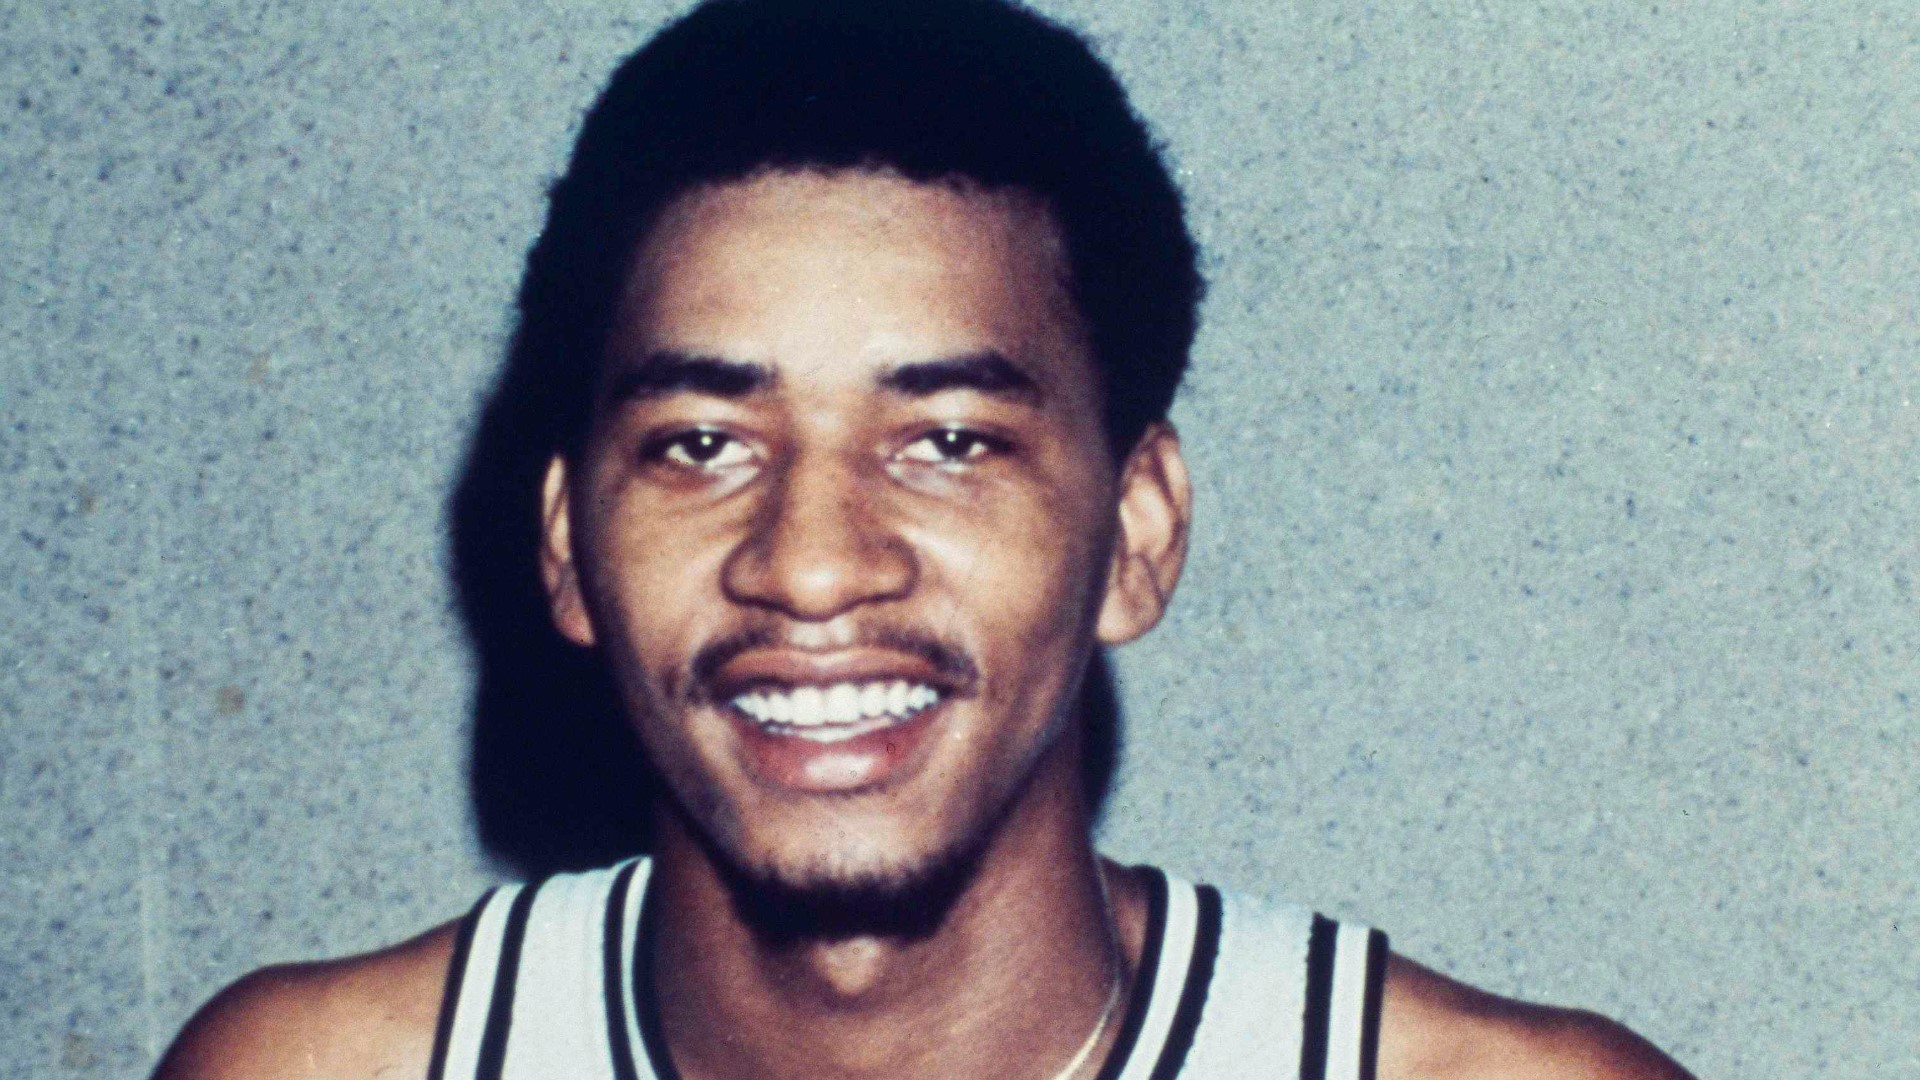 George 'The Iceman' Gervin used his finger roll finish to win four NBA scoring titles, the most ever before Michael Jordan came along.